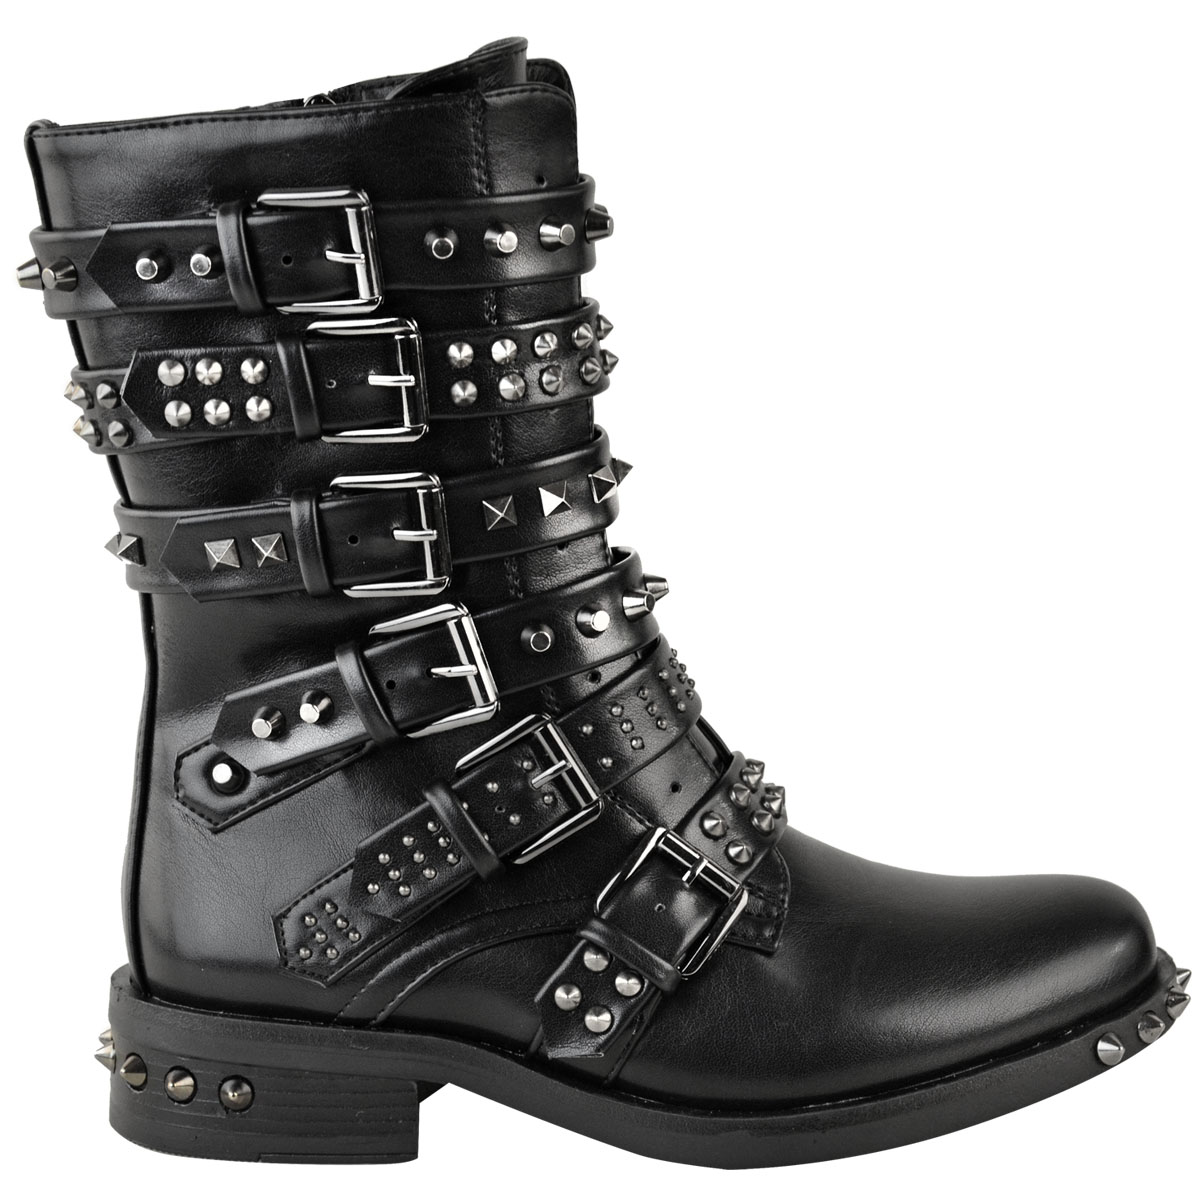 New Womens Flat Low Heel Studded Ankle Pit Boots Faux Leather Biker Buckles Punk 